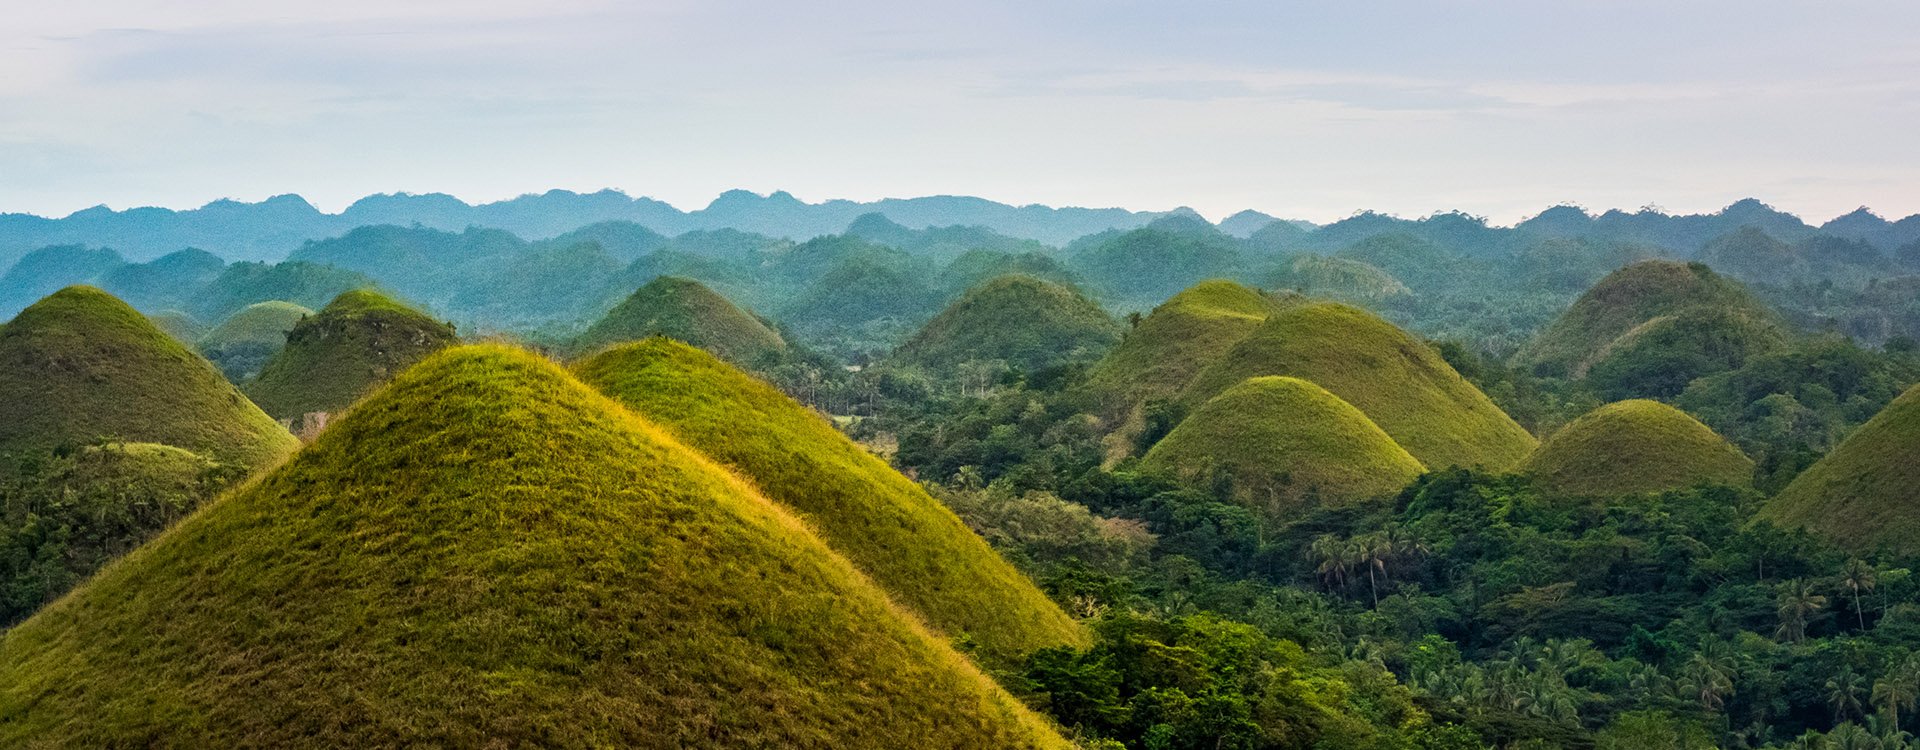 Chocolate hills, A geological formation in the Bohol province of the Philippines